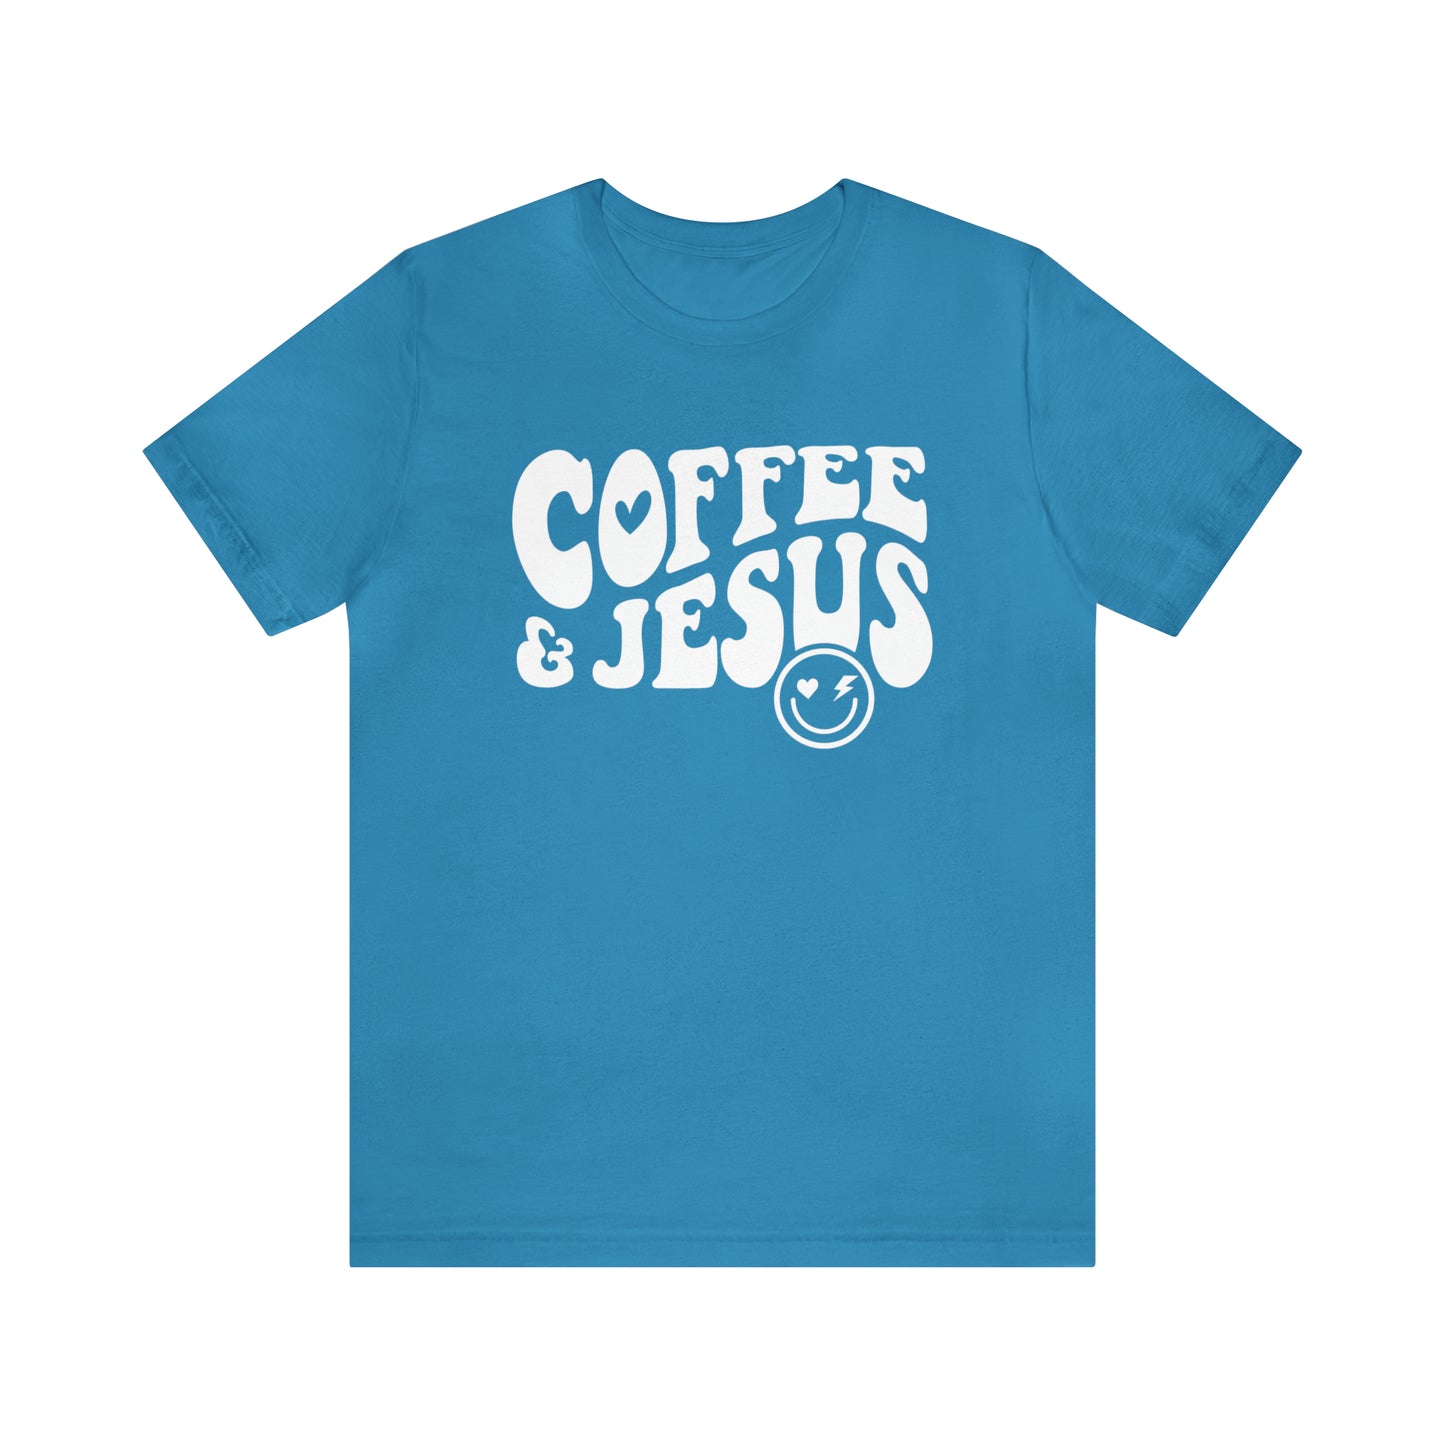 Coffee and Jesus - Jersey Short Sleeve T-Shirt